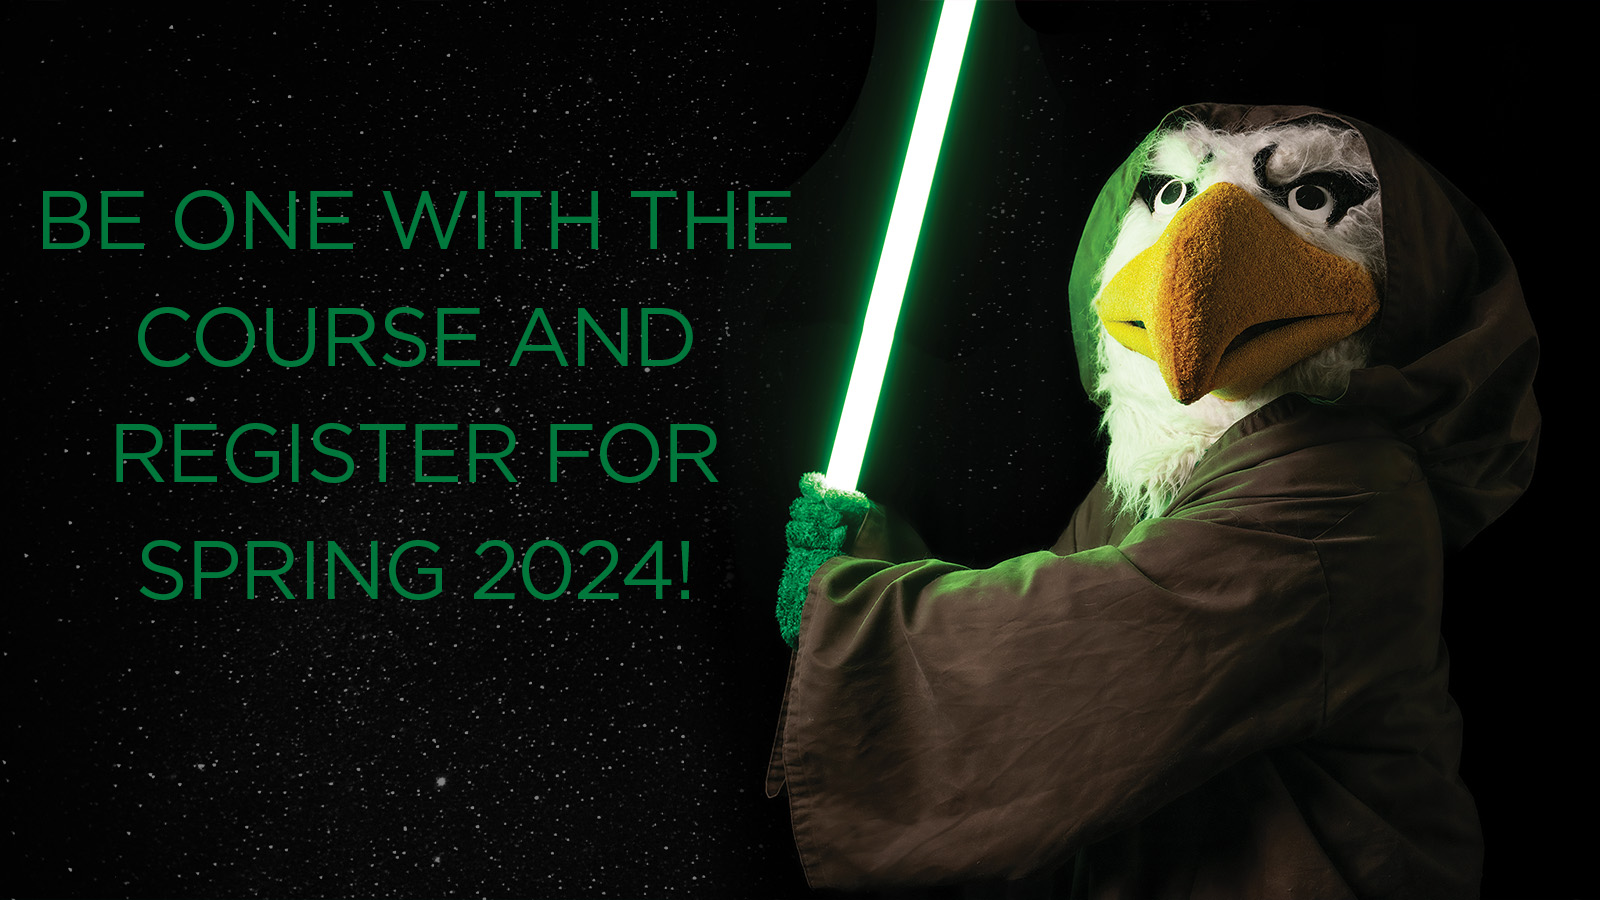 Scrappy as a Jedi captioned "Be one with the course and register for Spring 2024!"